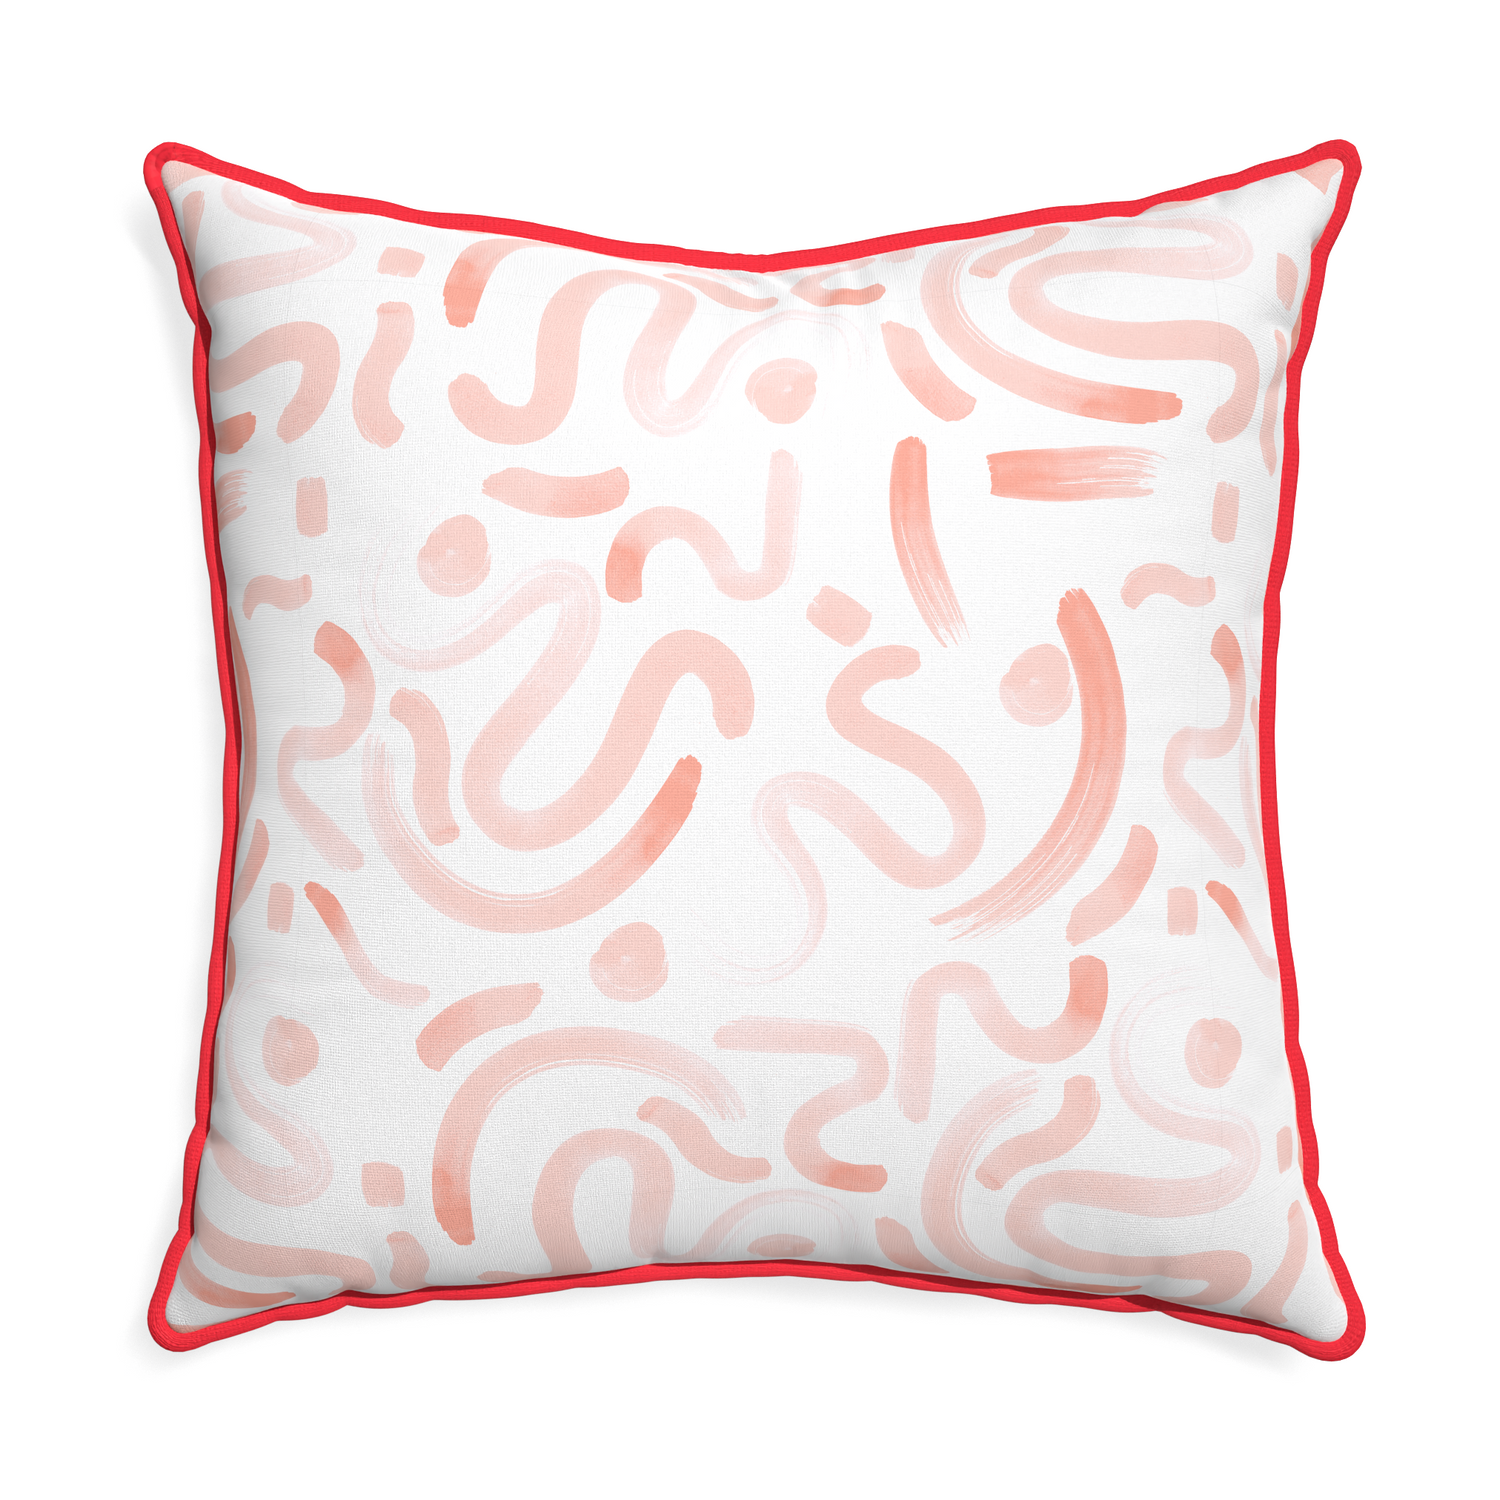 Euro-sham hockney pink custom pillow with cherry piping on white background